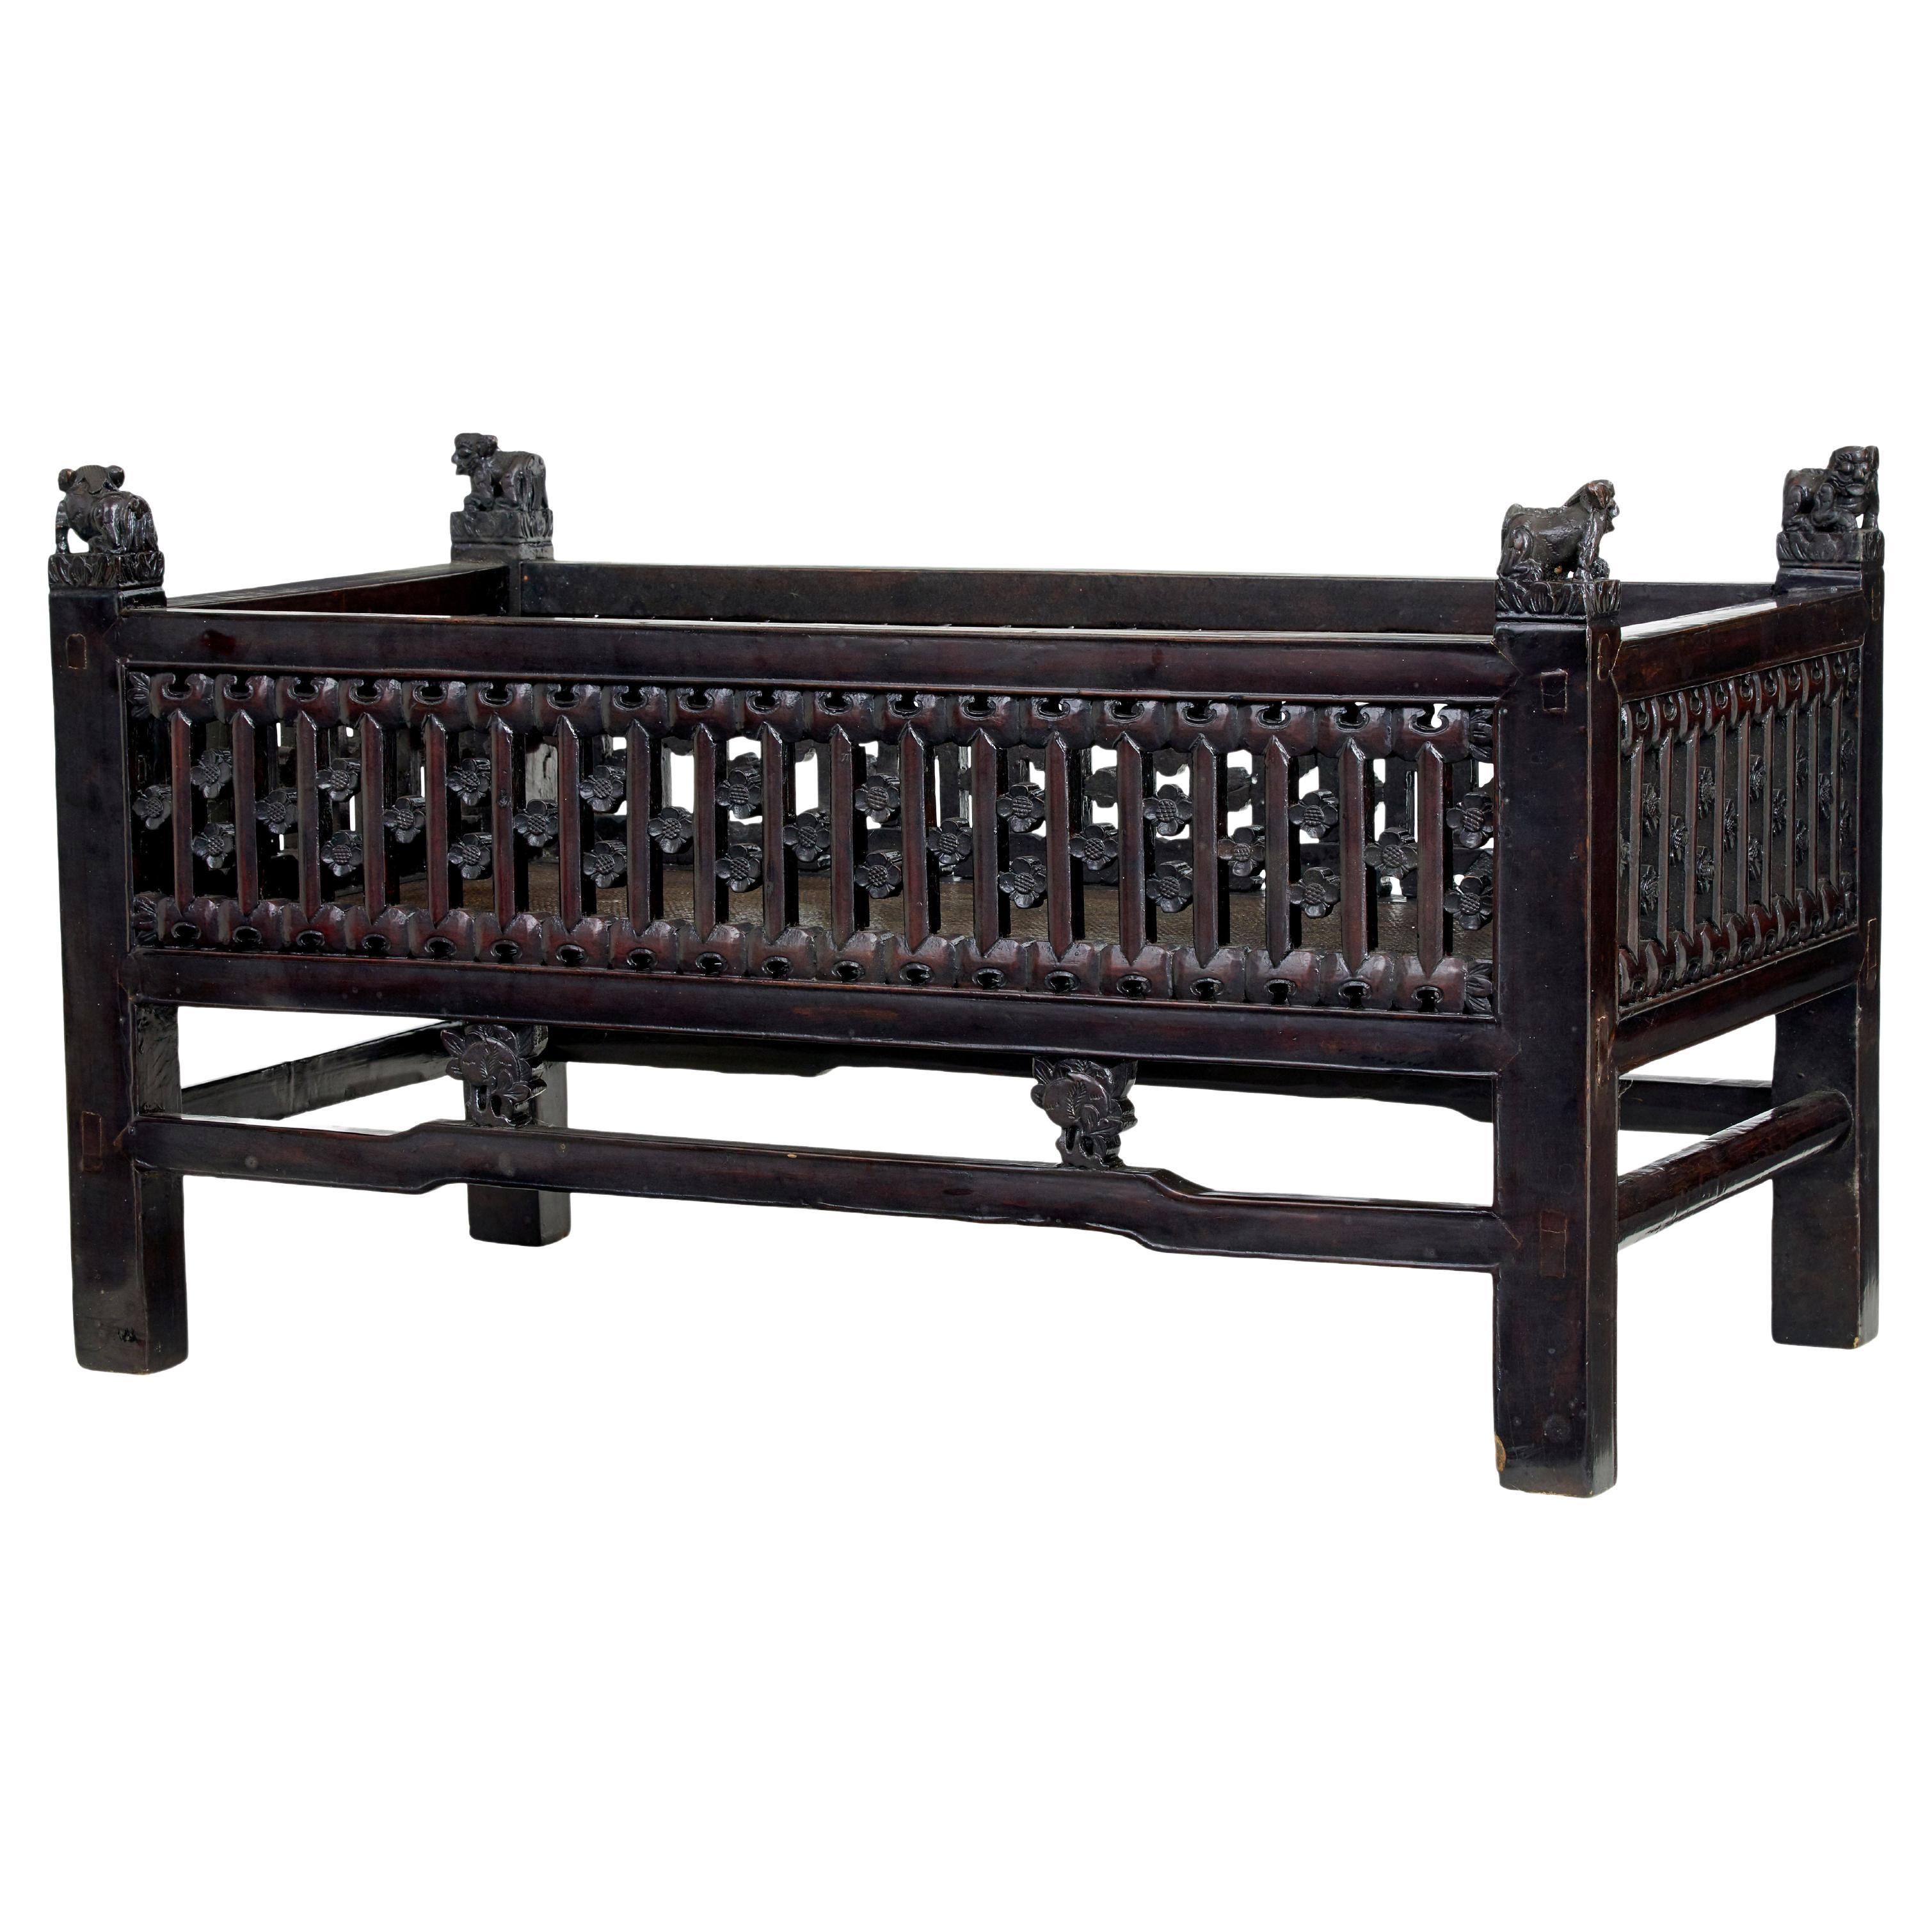 19th century Chinese lacquered child's bed